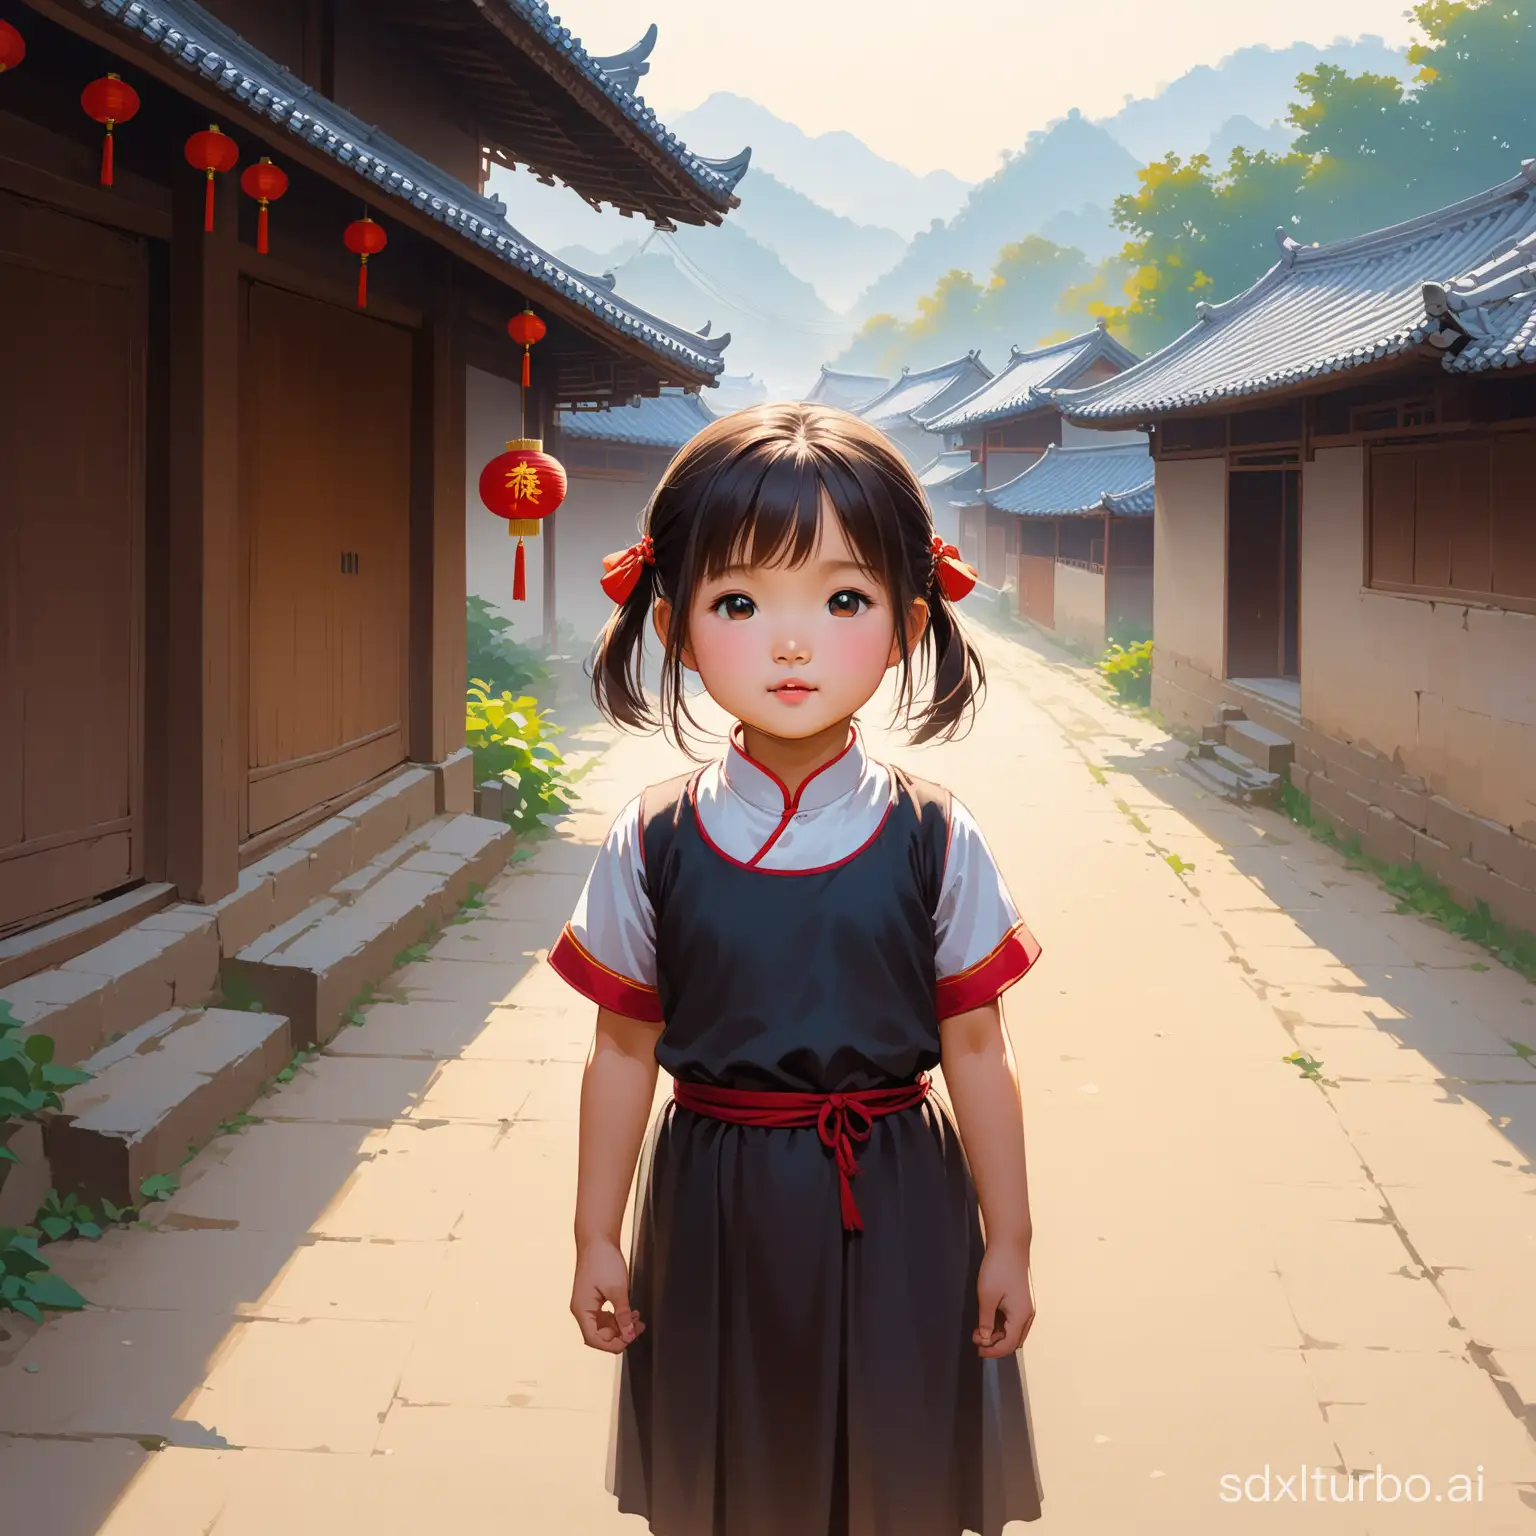 Young-Girl-in-Rural-China